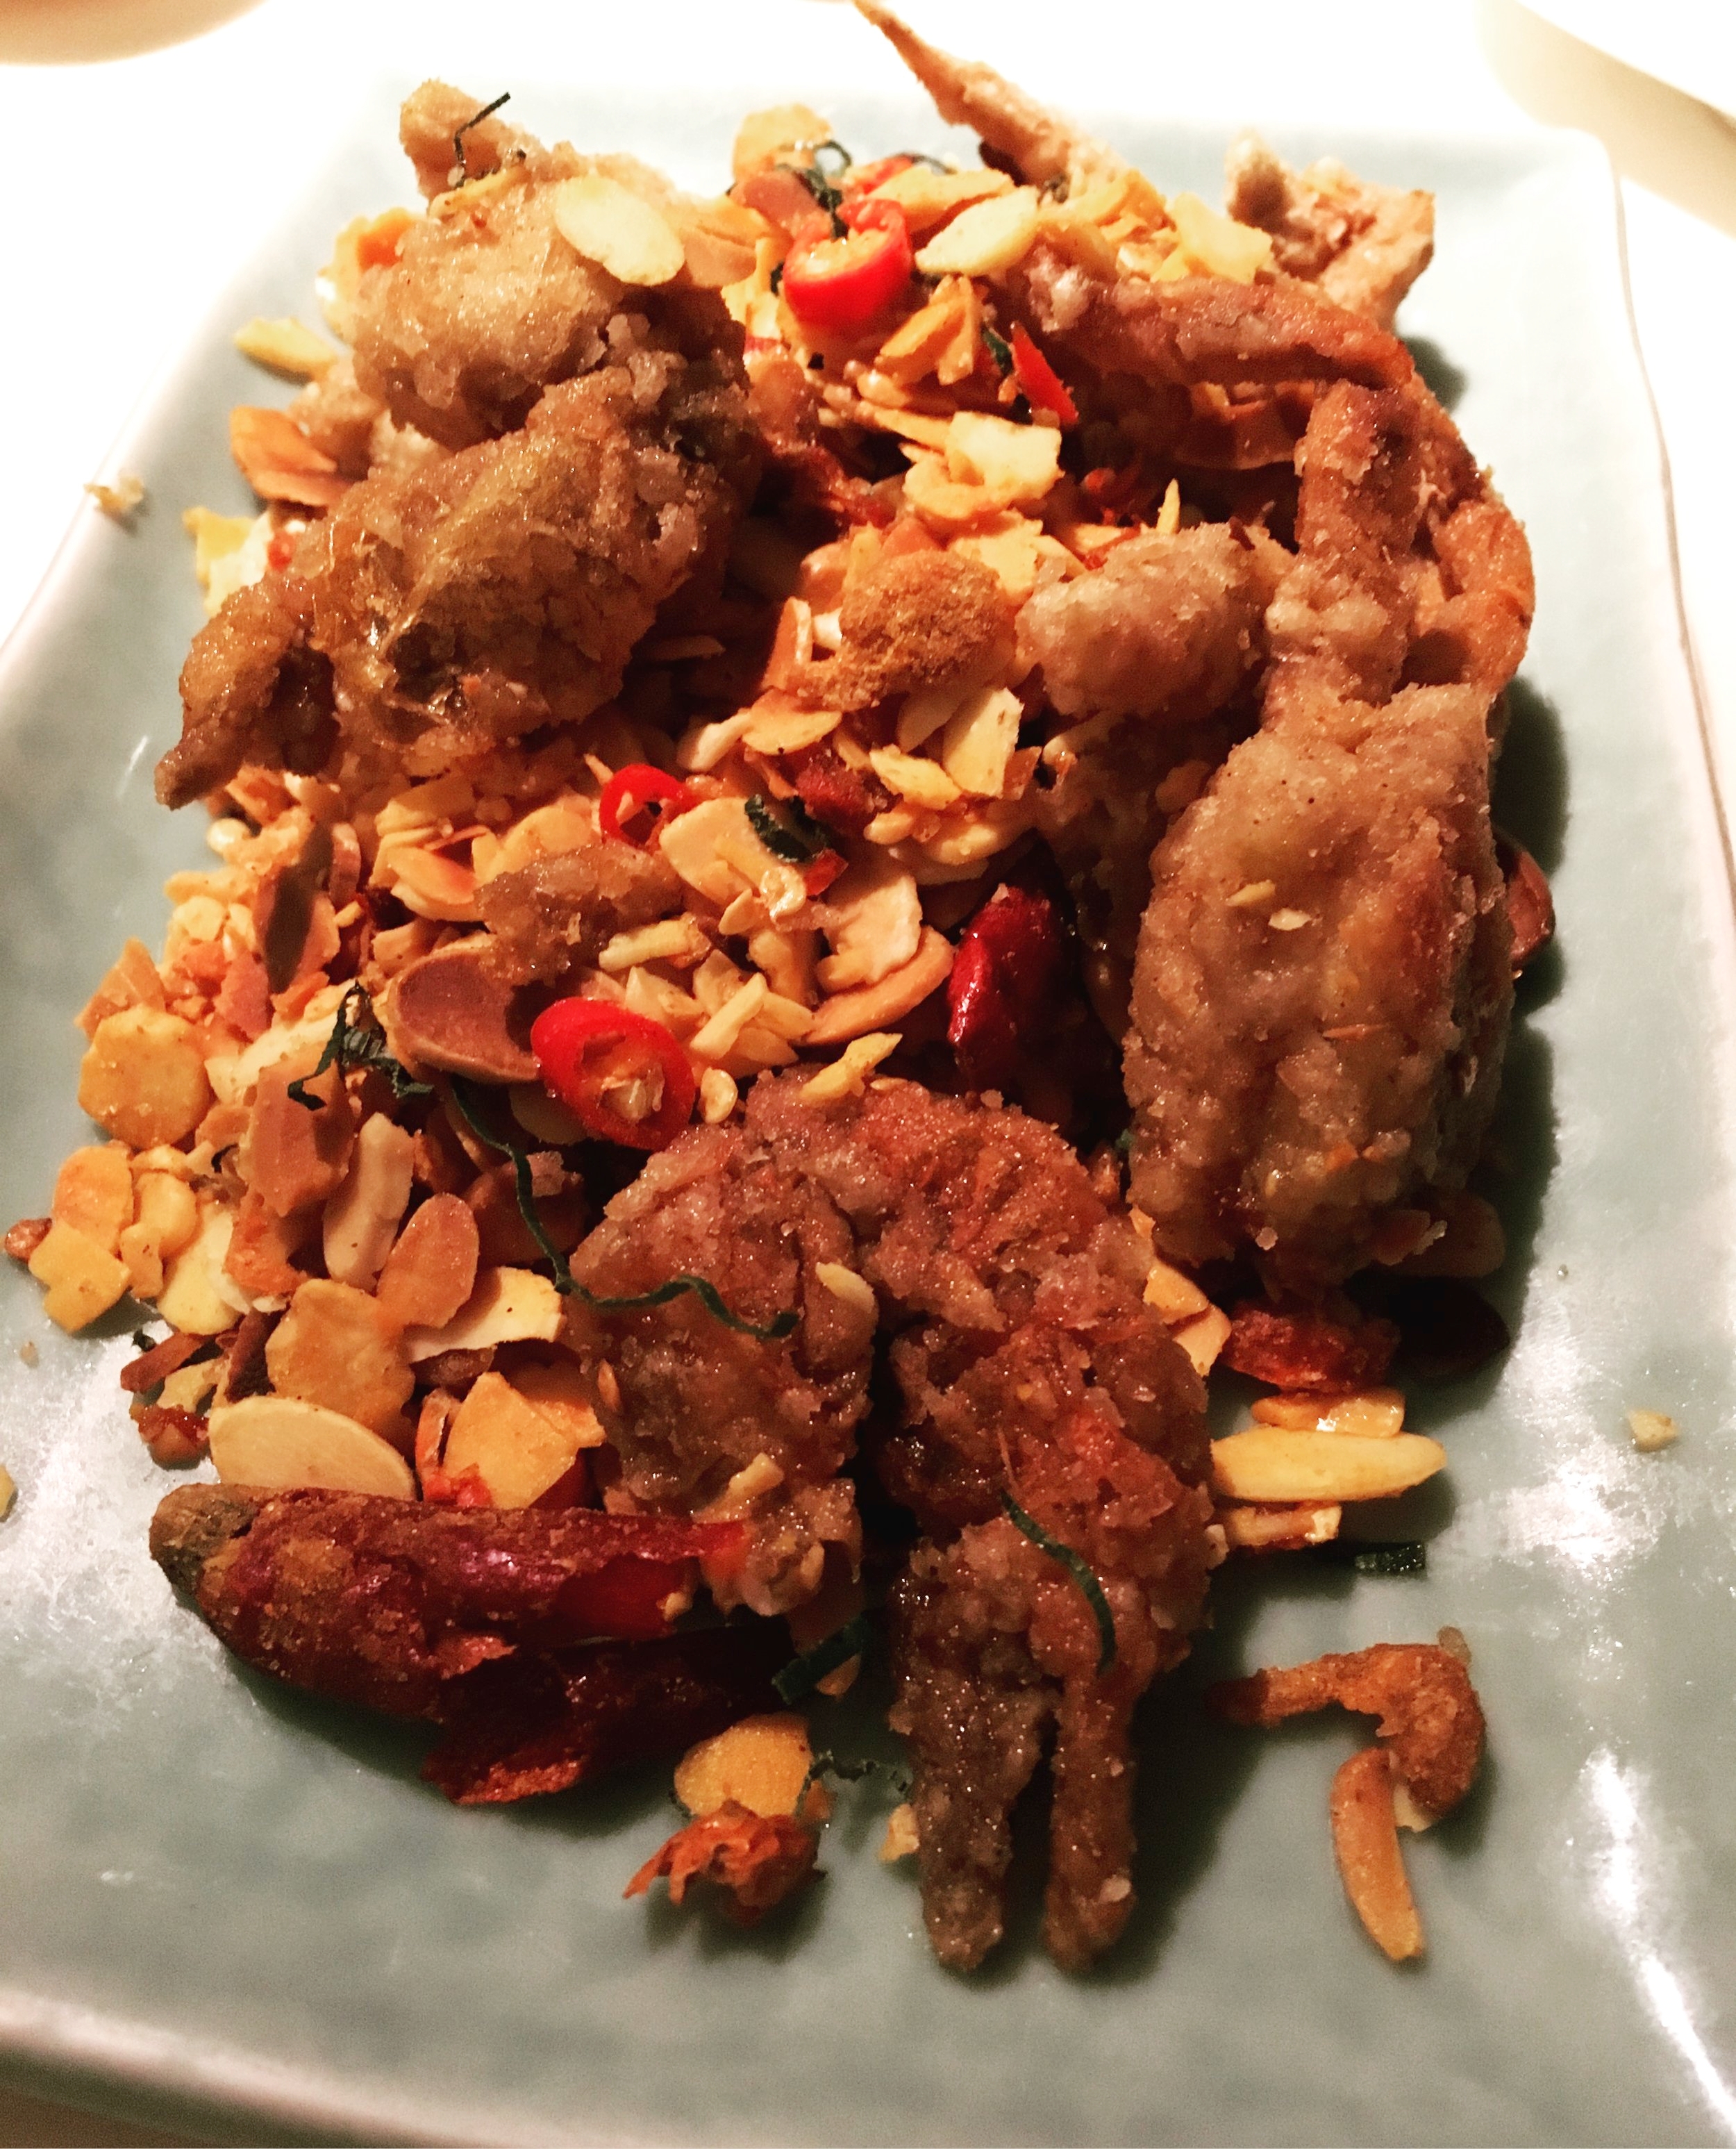 Soft Shell Crab with Garlic and Chillis